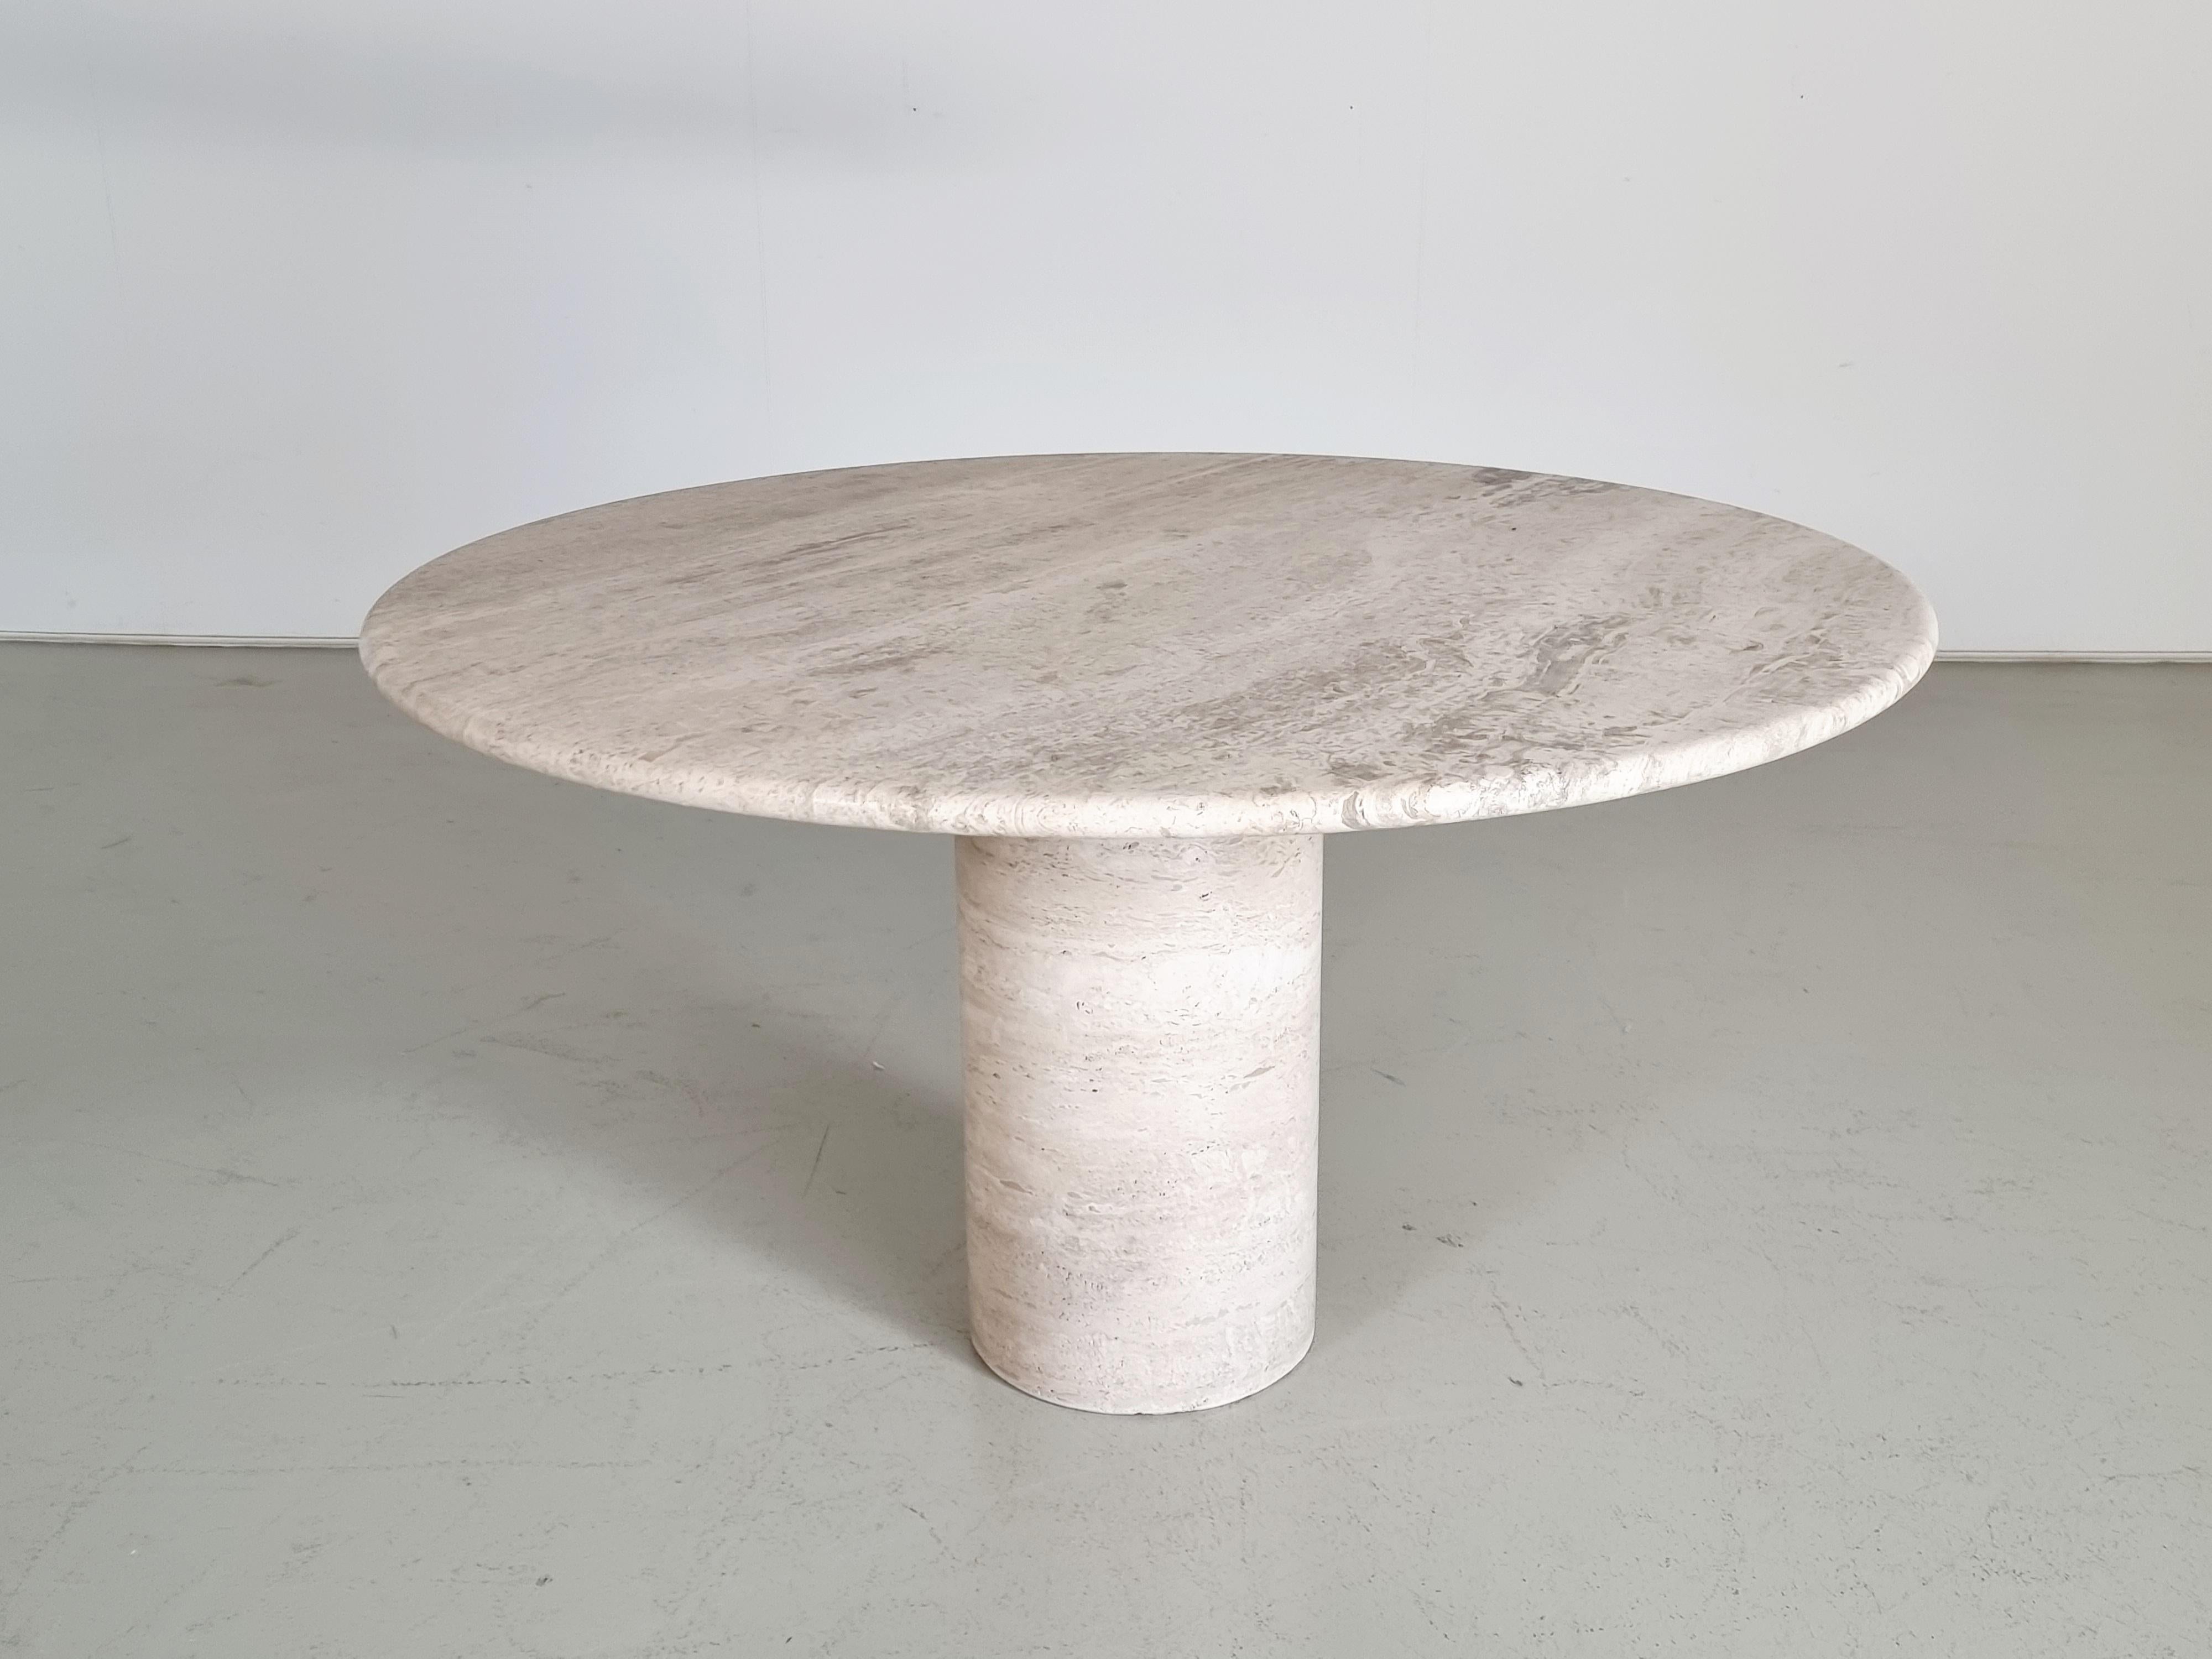 High-quality Italian travertine marble table in very good condition.

Attributed to Up & Up Italy in the 1970s. Thick travertine top in variegated tones of grey, beige, and brown. The top rests on a round pedestal base also made of travertine. The